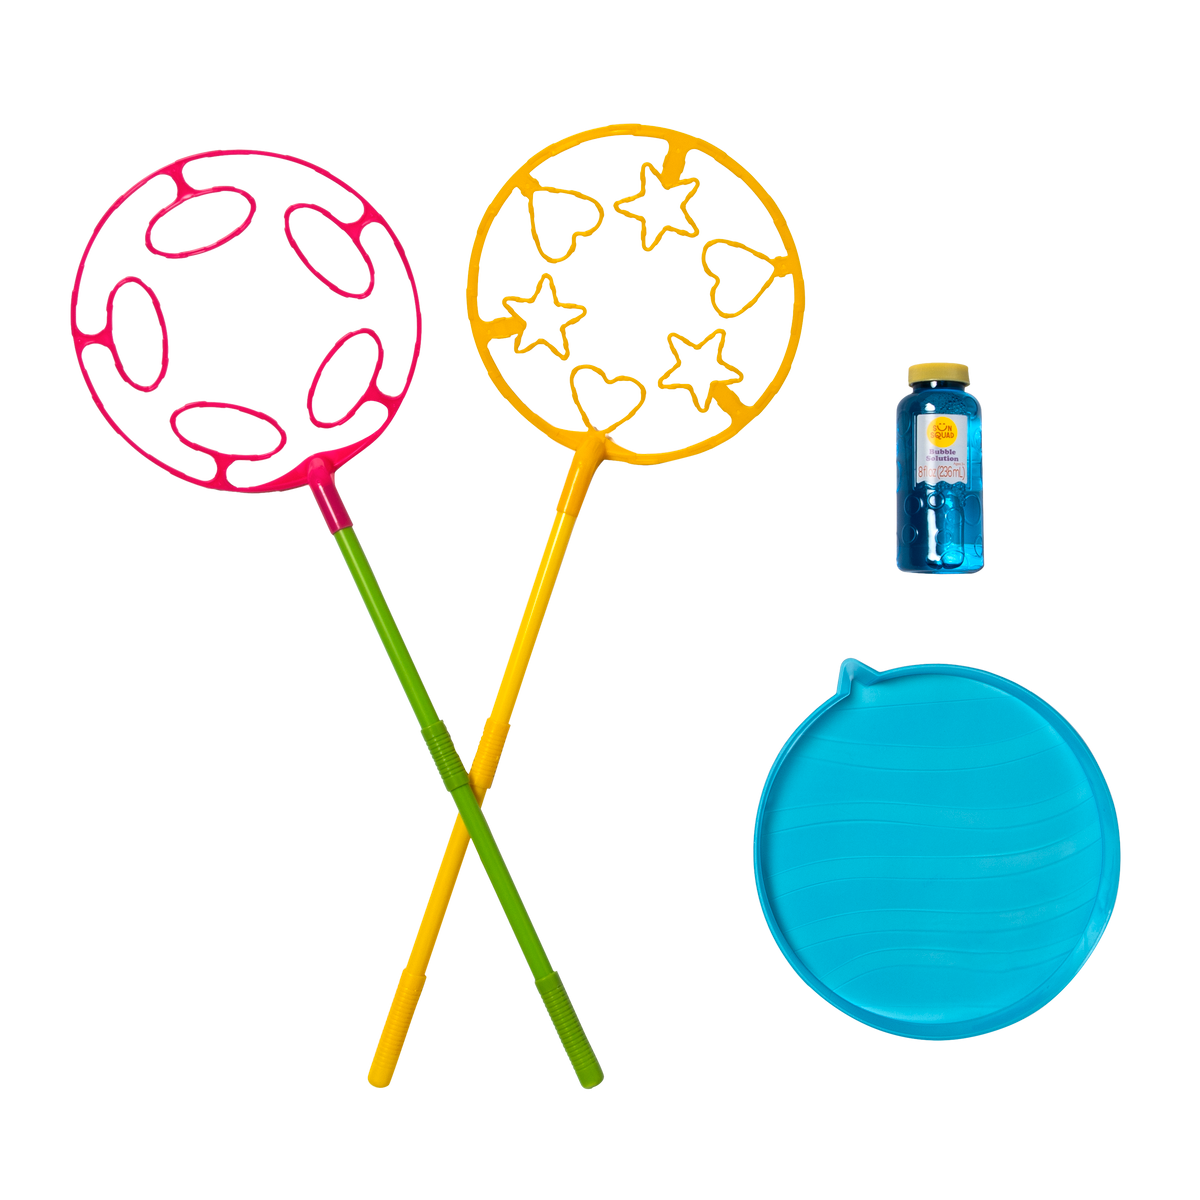 Two giant bubble wands, one with ovals and one with stars and hearts